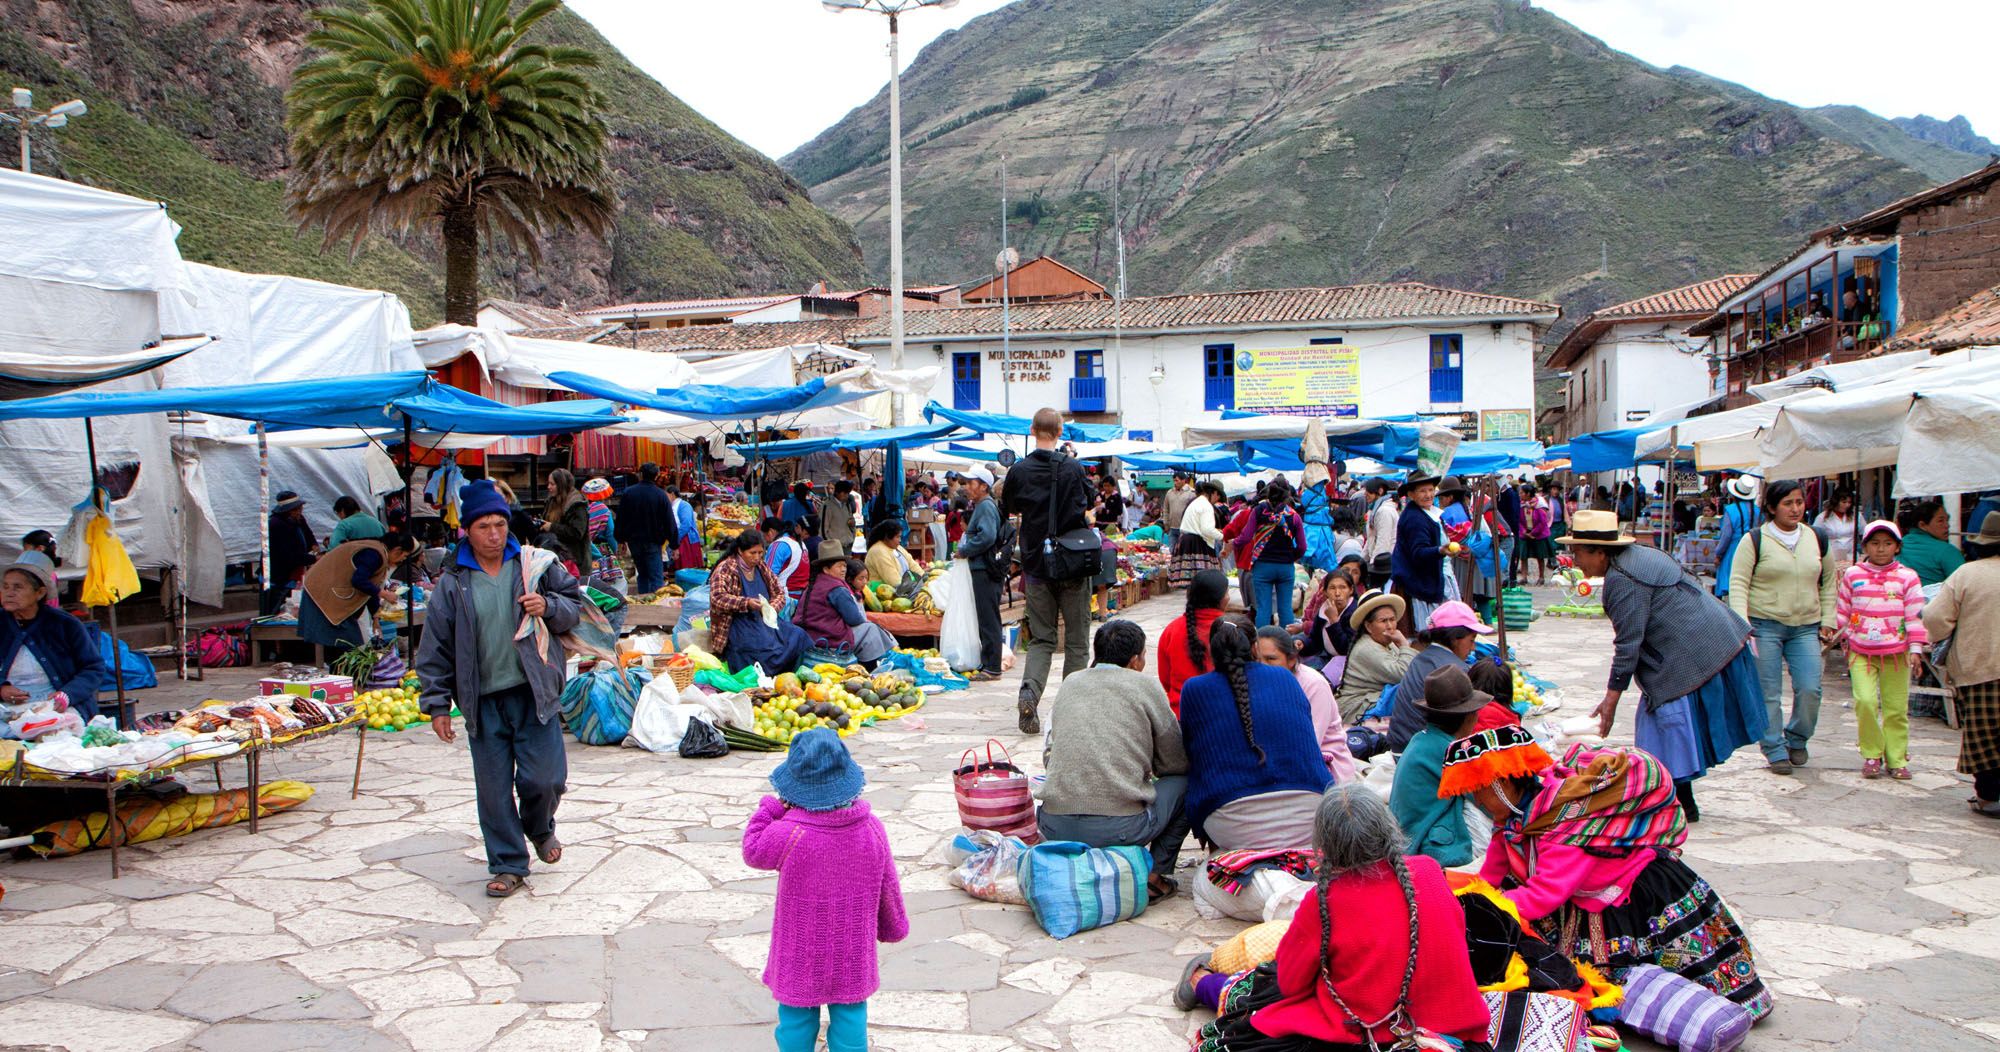 Featured image for “Shopping at the Market in Pisac”